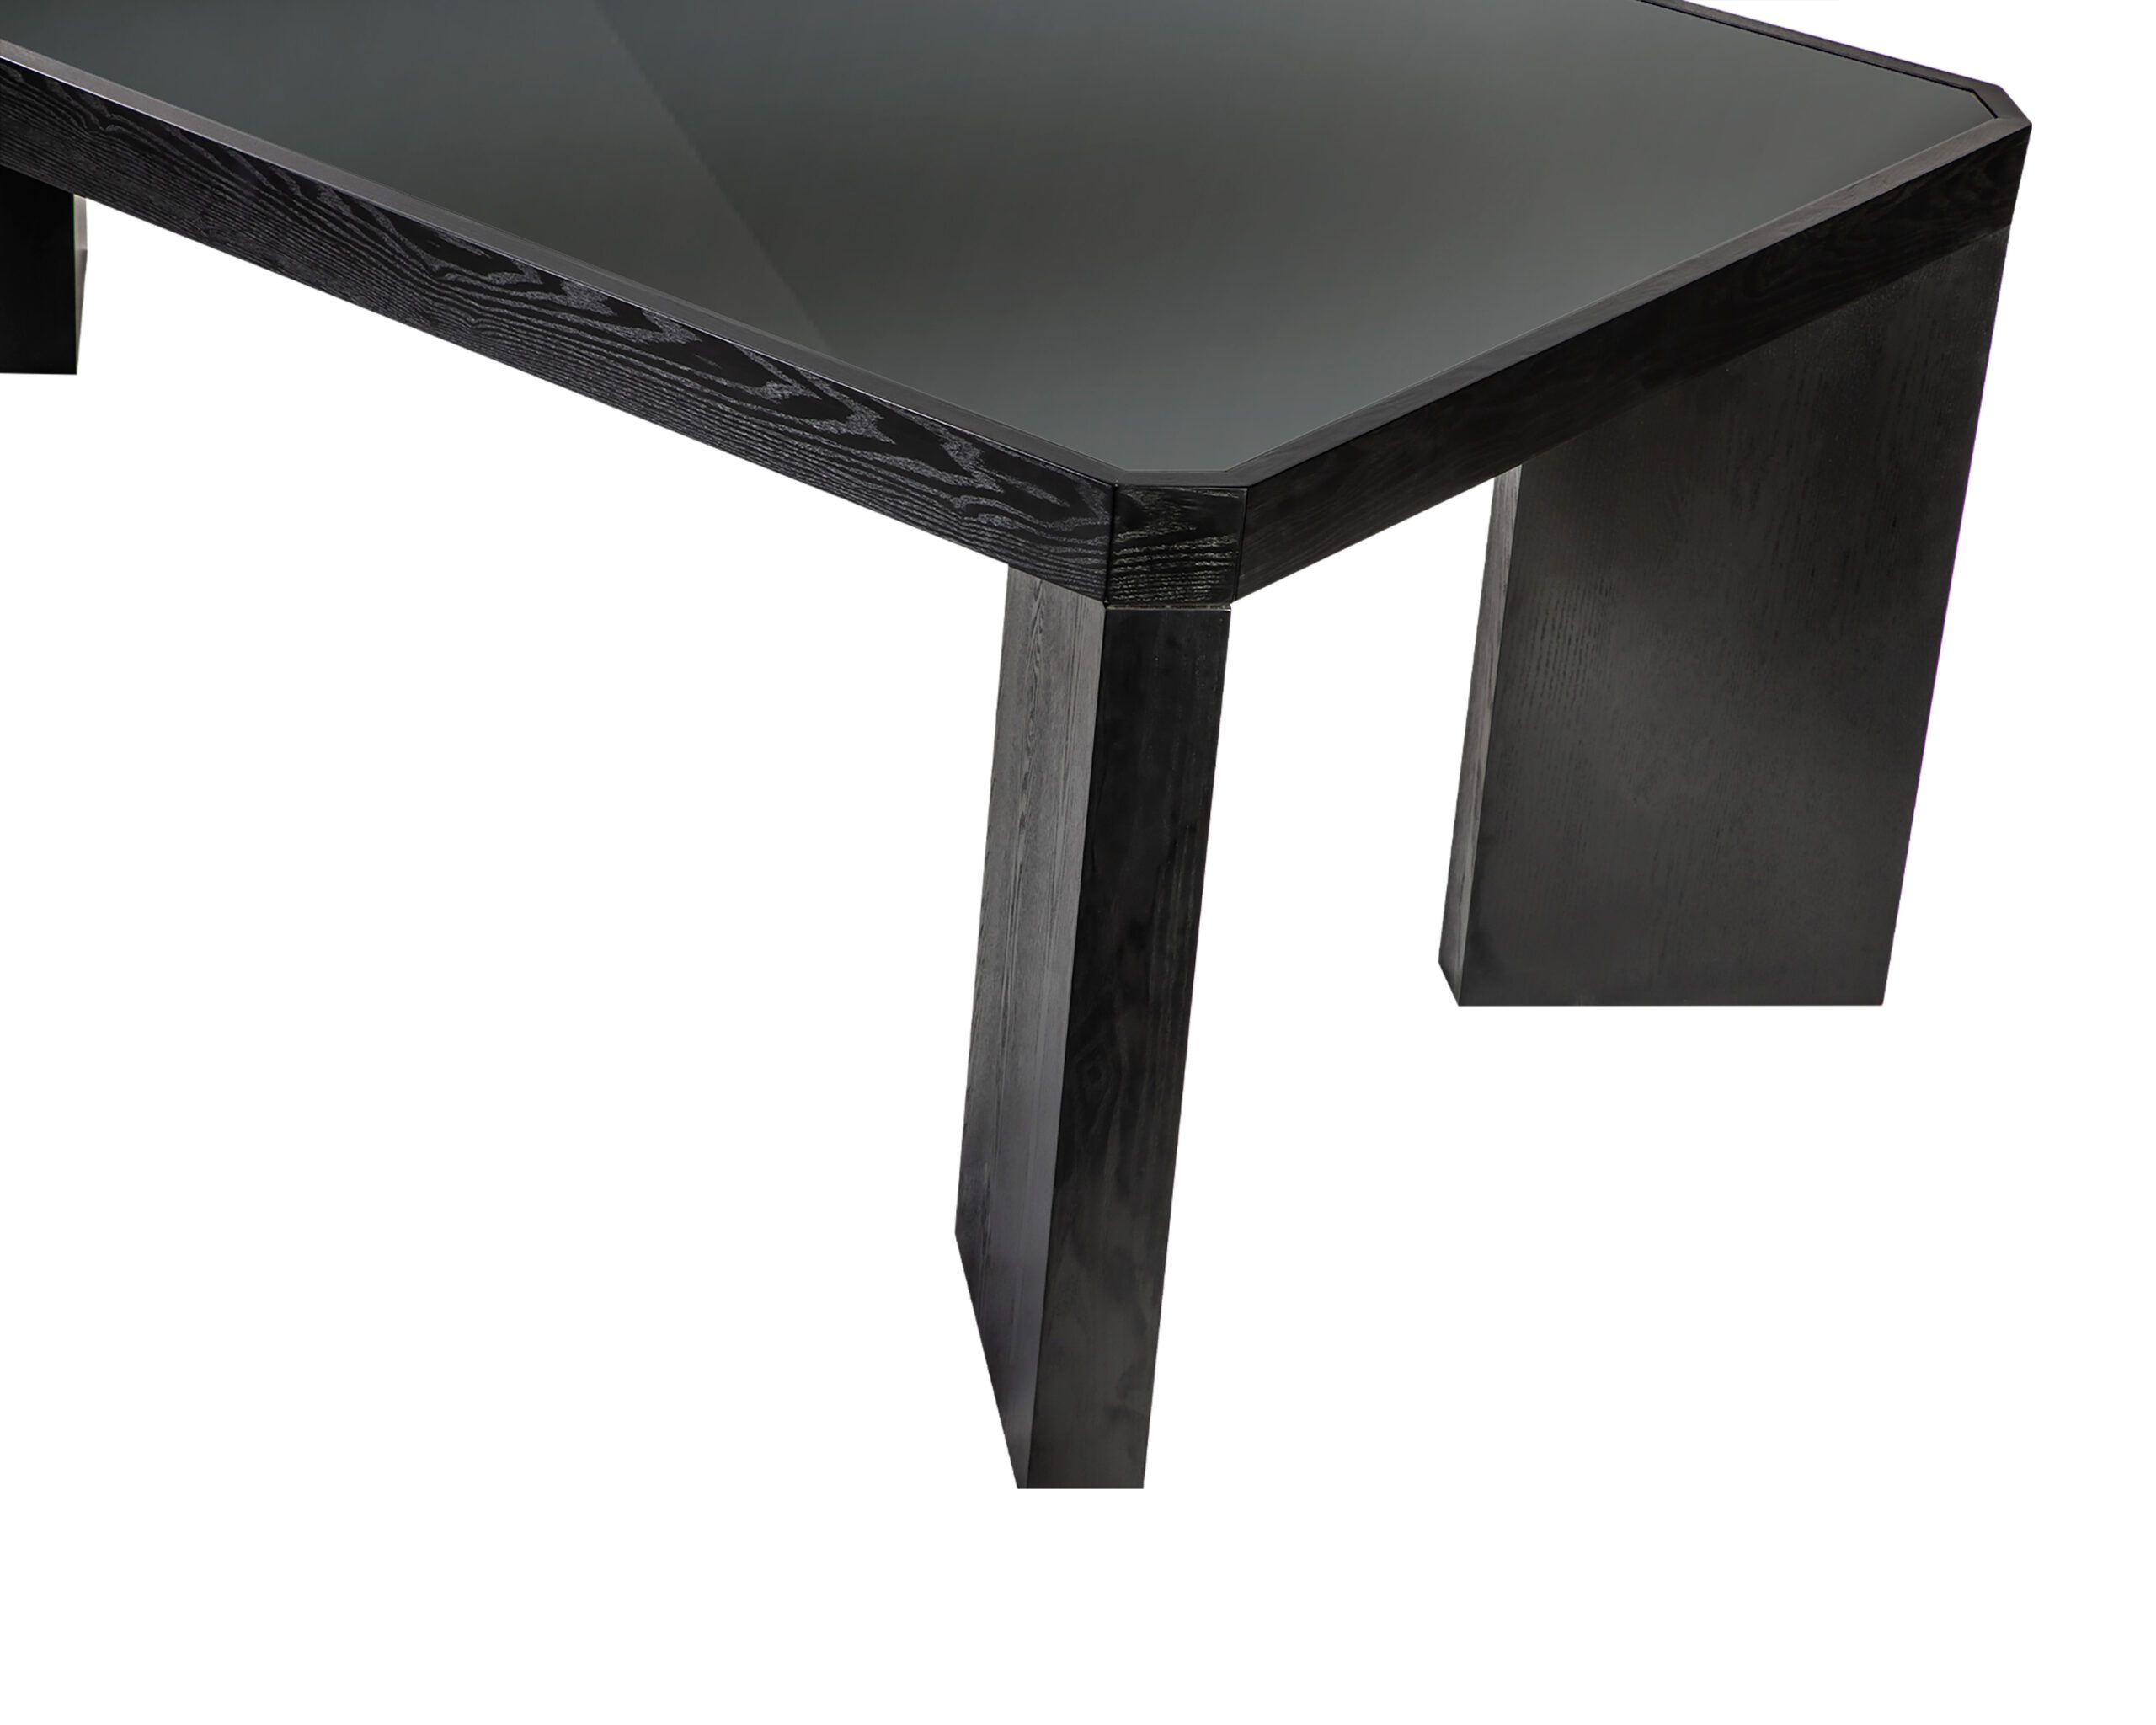 LE002-DT-2028_L&E_Baltimore Dining Table_4000 x 3200_4